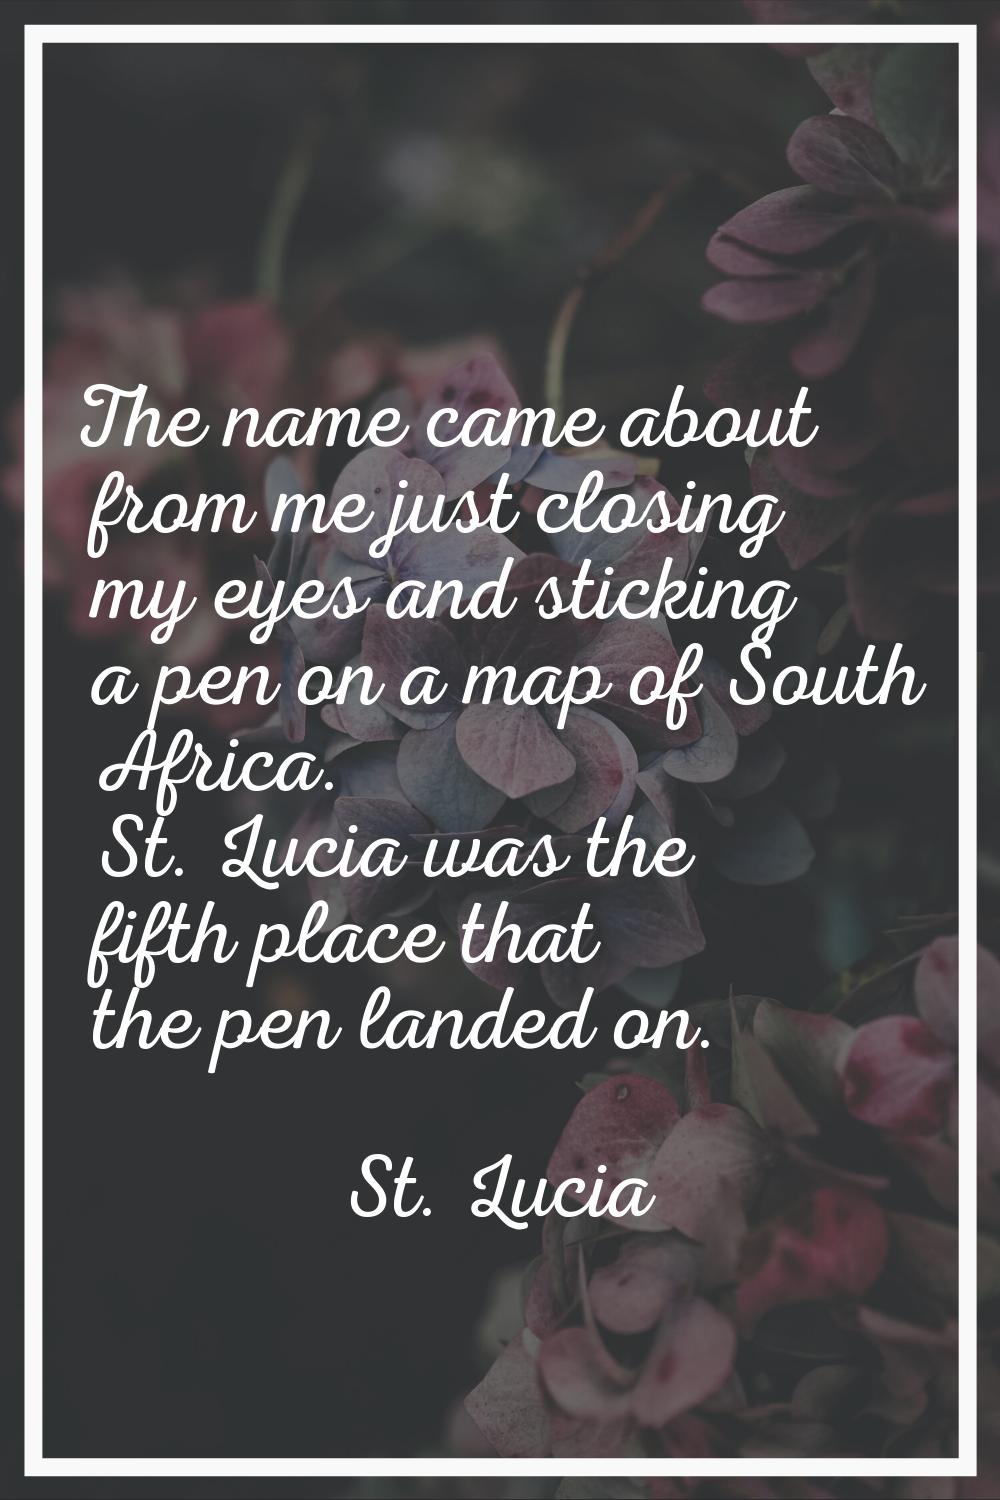 The name came about from me just closing my eyes and sticking a pen on a map of South Africa. St. L